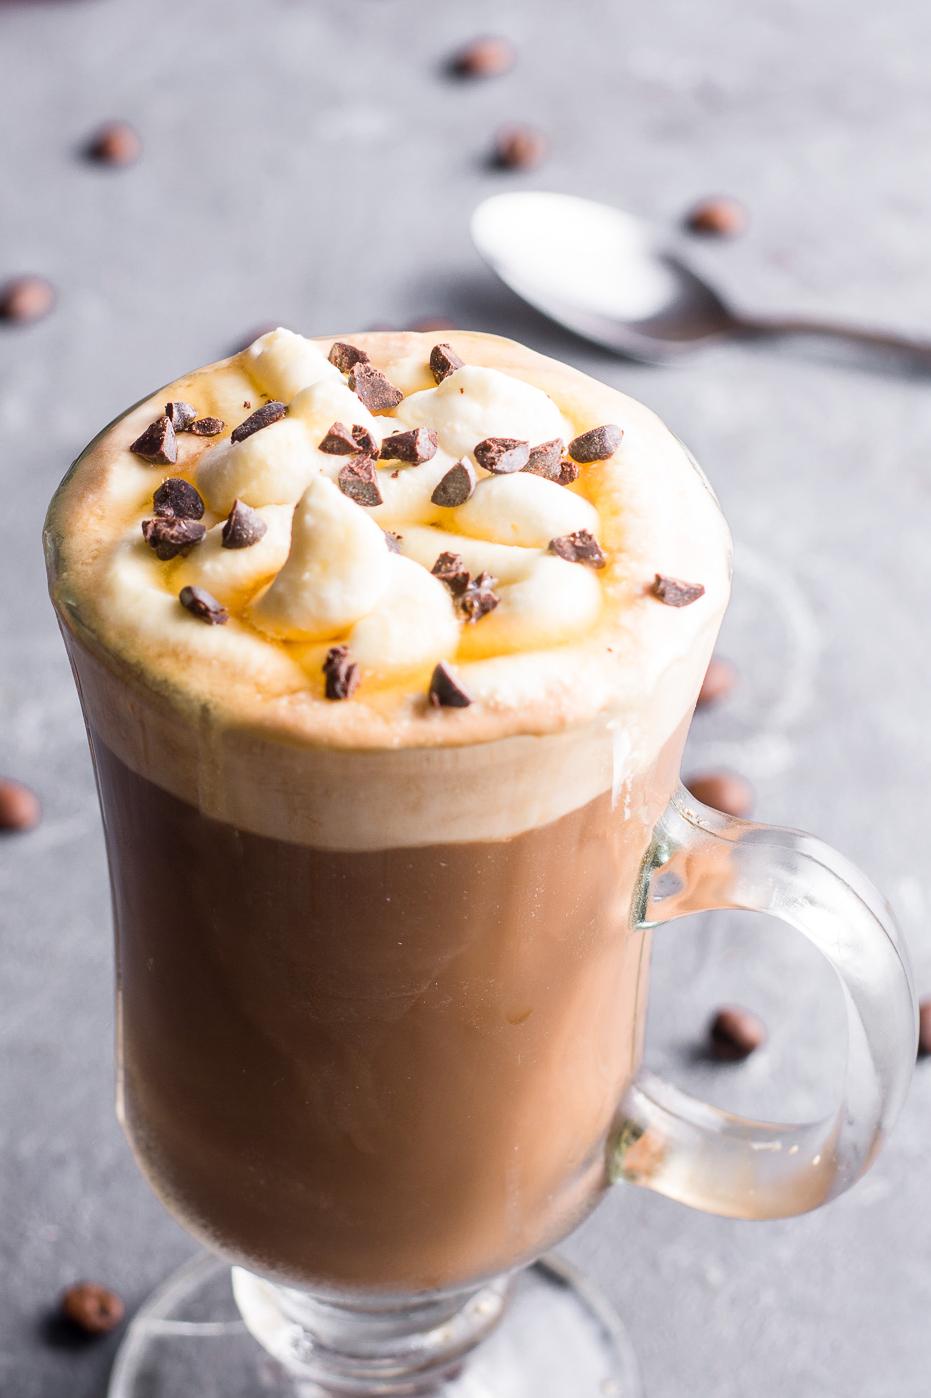  Make your very own Caffe Mocha with this easy recipe.